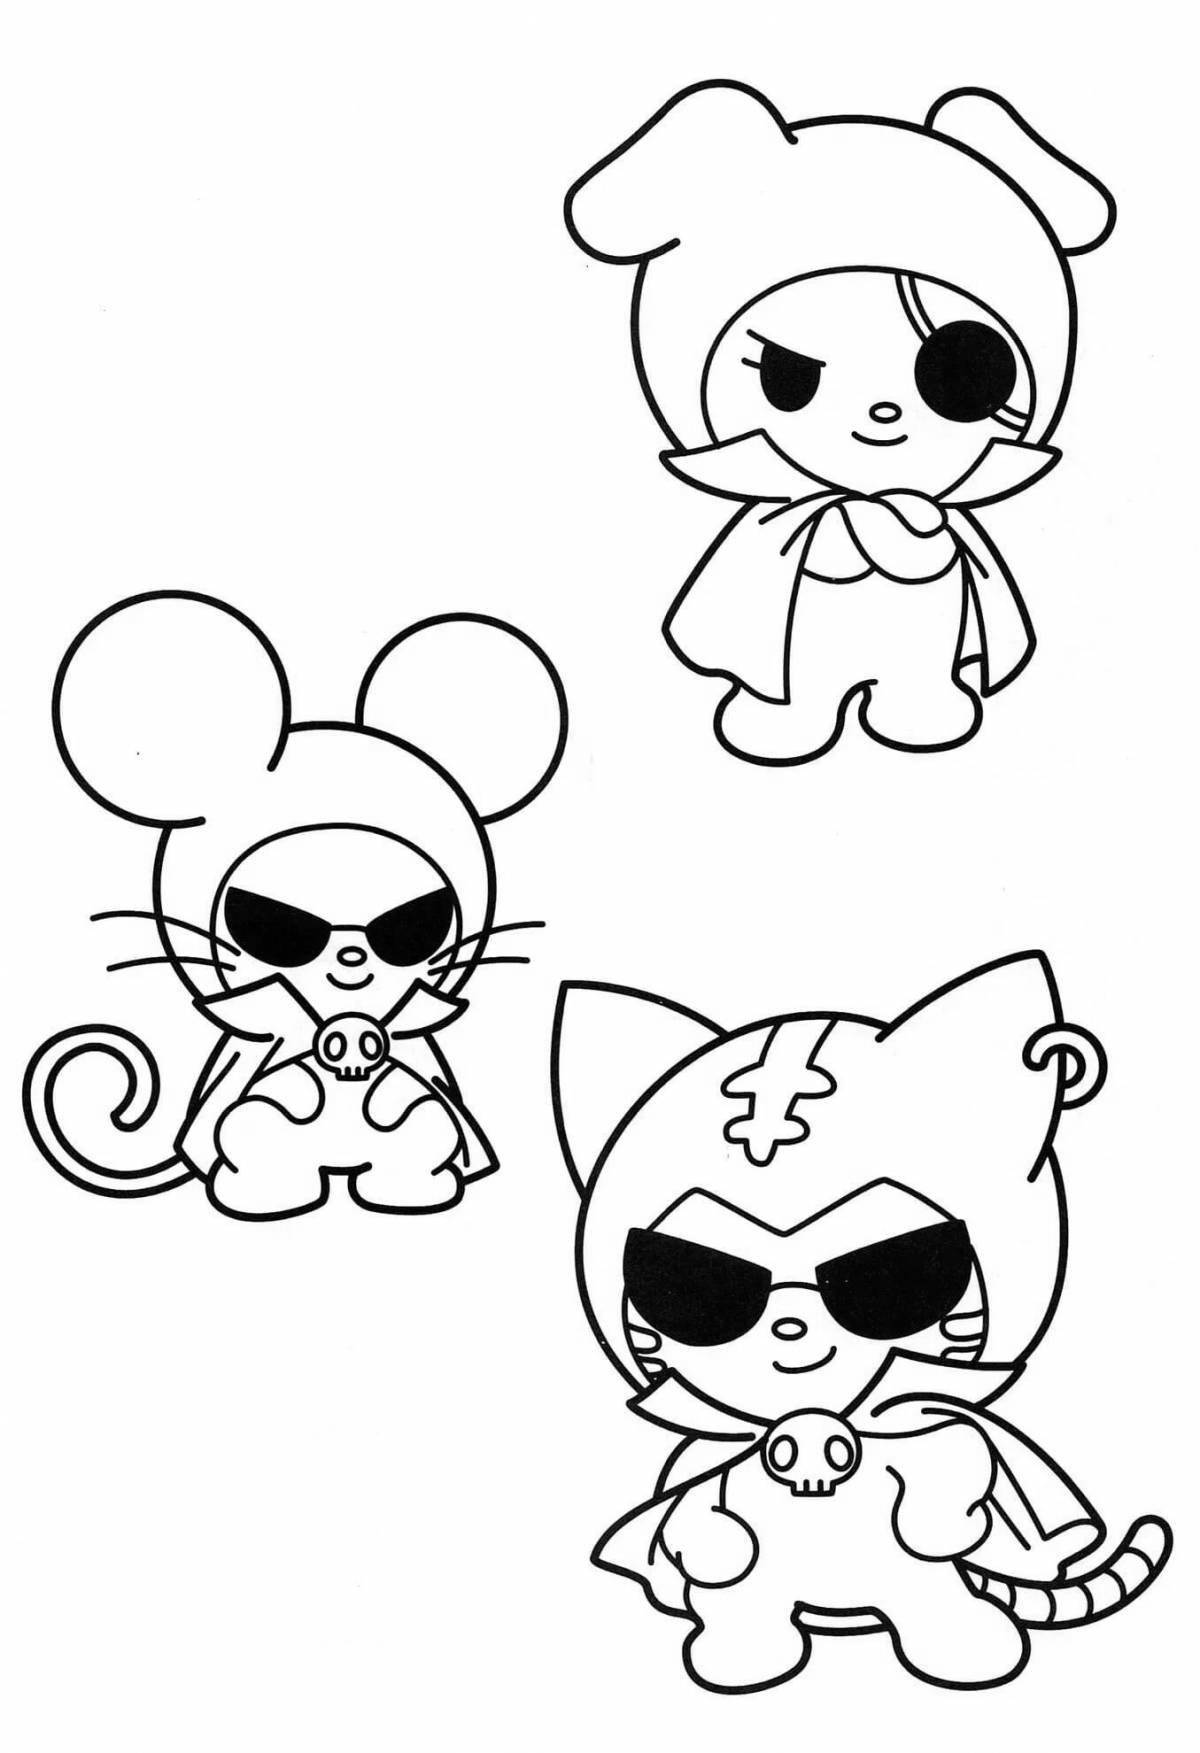 Adorable kuromi and melody coloring page